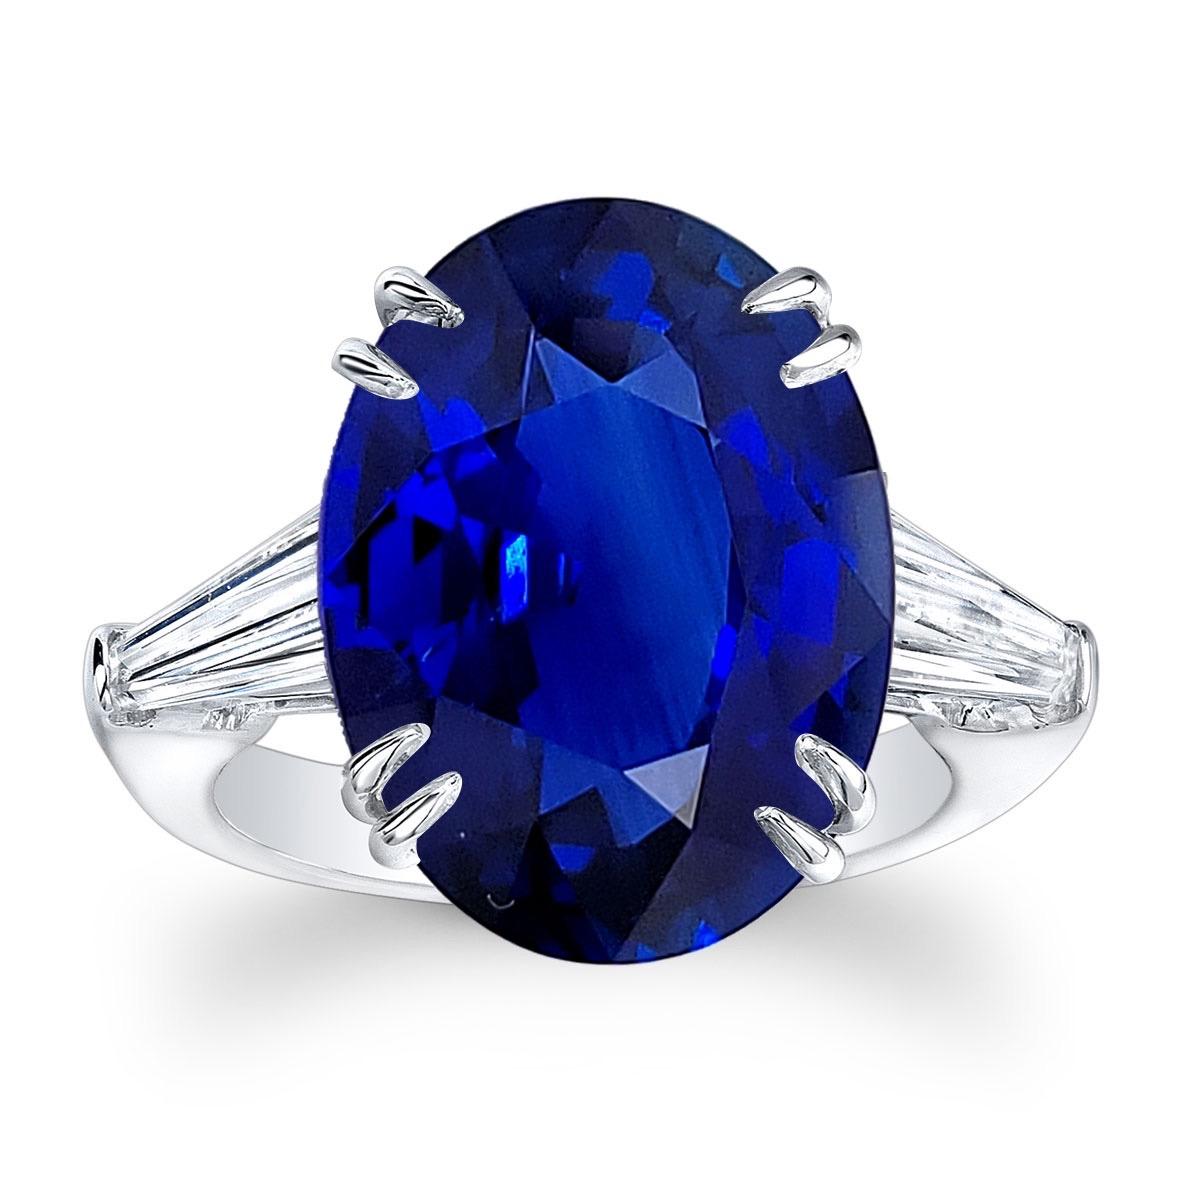 From The Museum Vault At Emilio Jewelry New York,
Approximate total weight listed. The center alone is a magnificent certified Royal Blue Ceylon Sapphire. The sapphire is very clean and excellent luster. 
Please inquire for more images, the